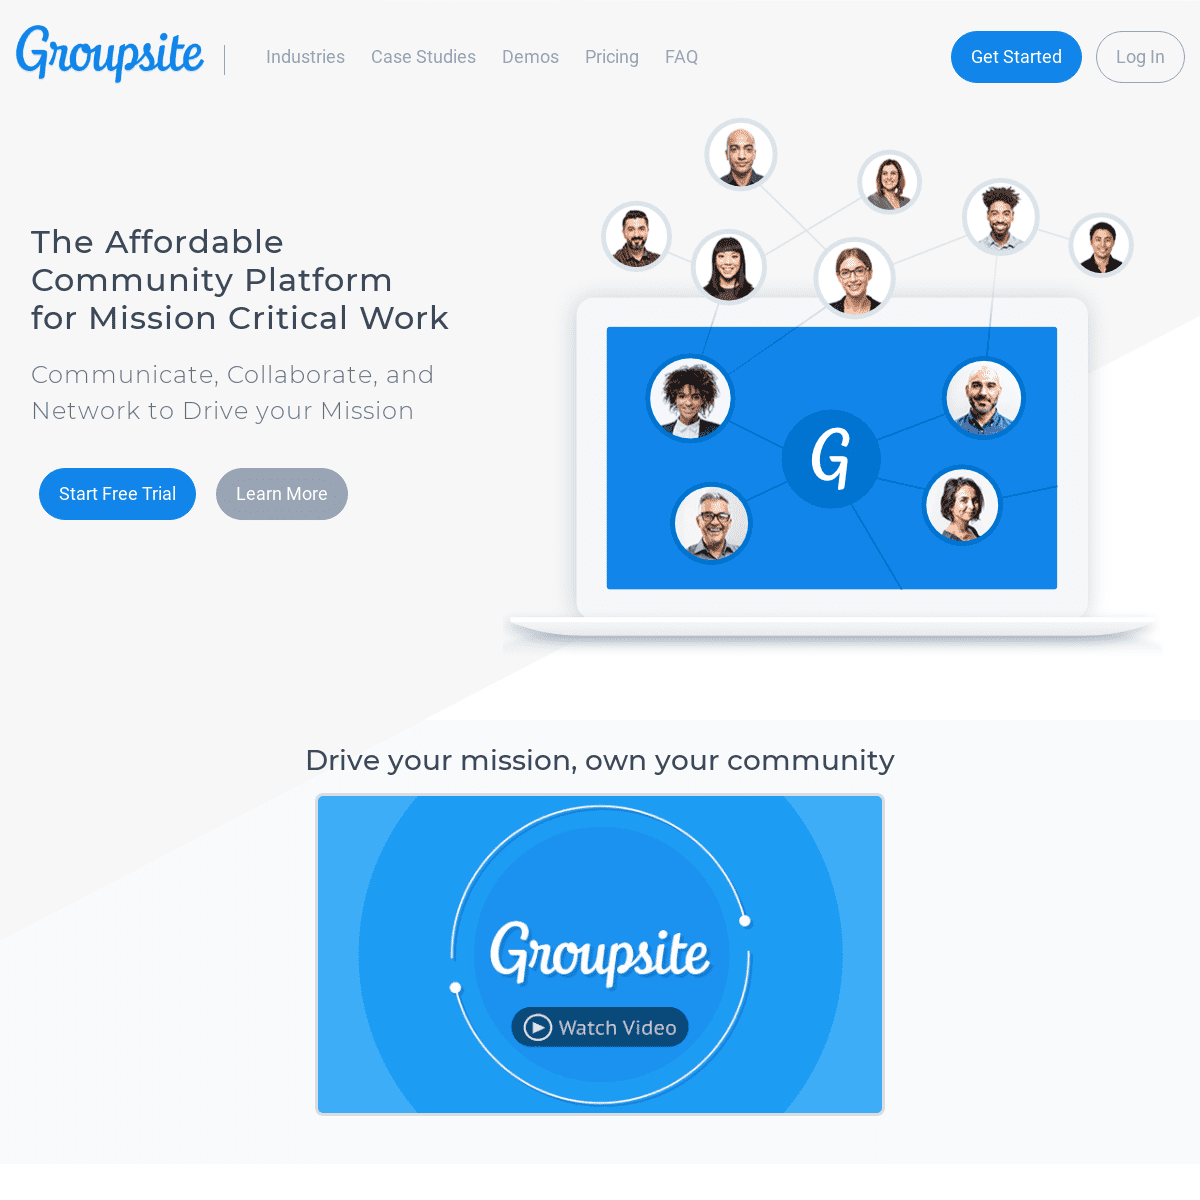 A complete backup of groupsite.com